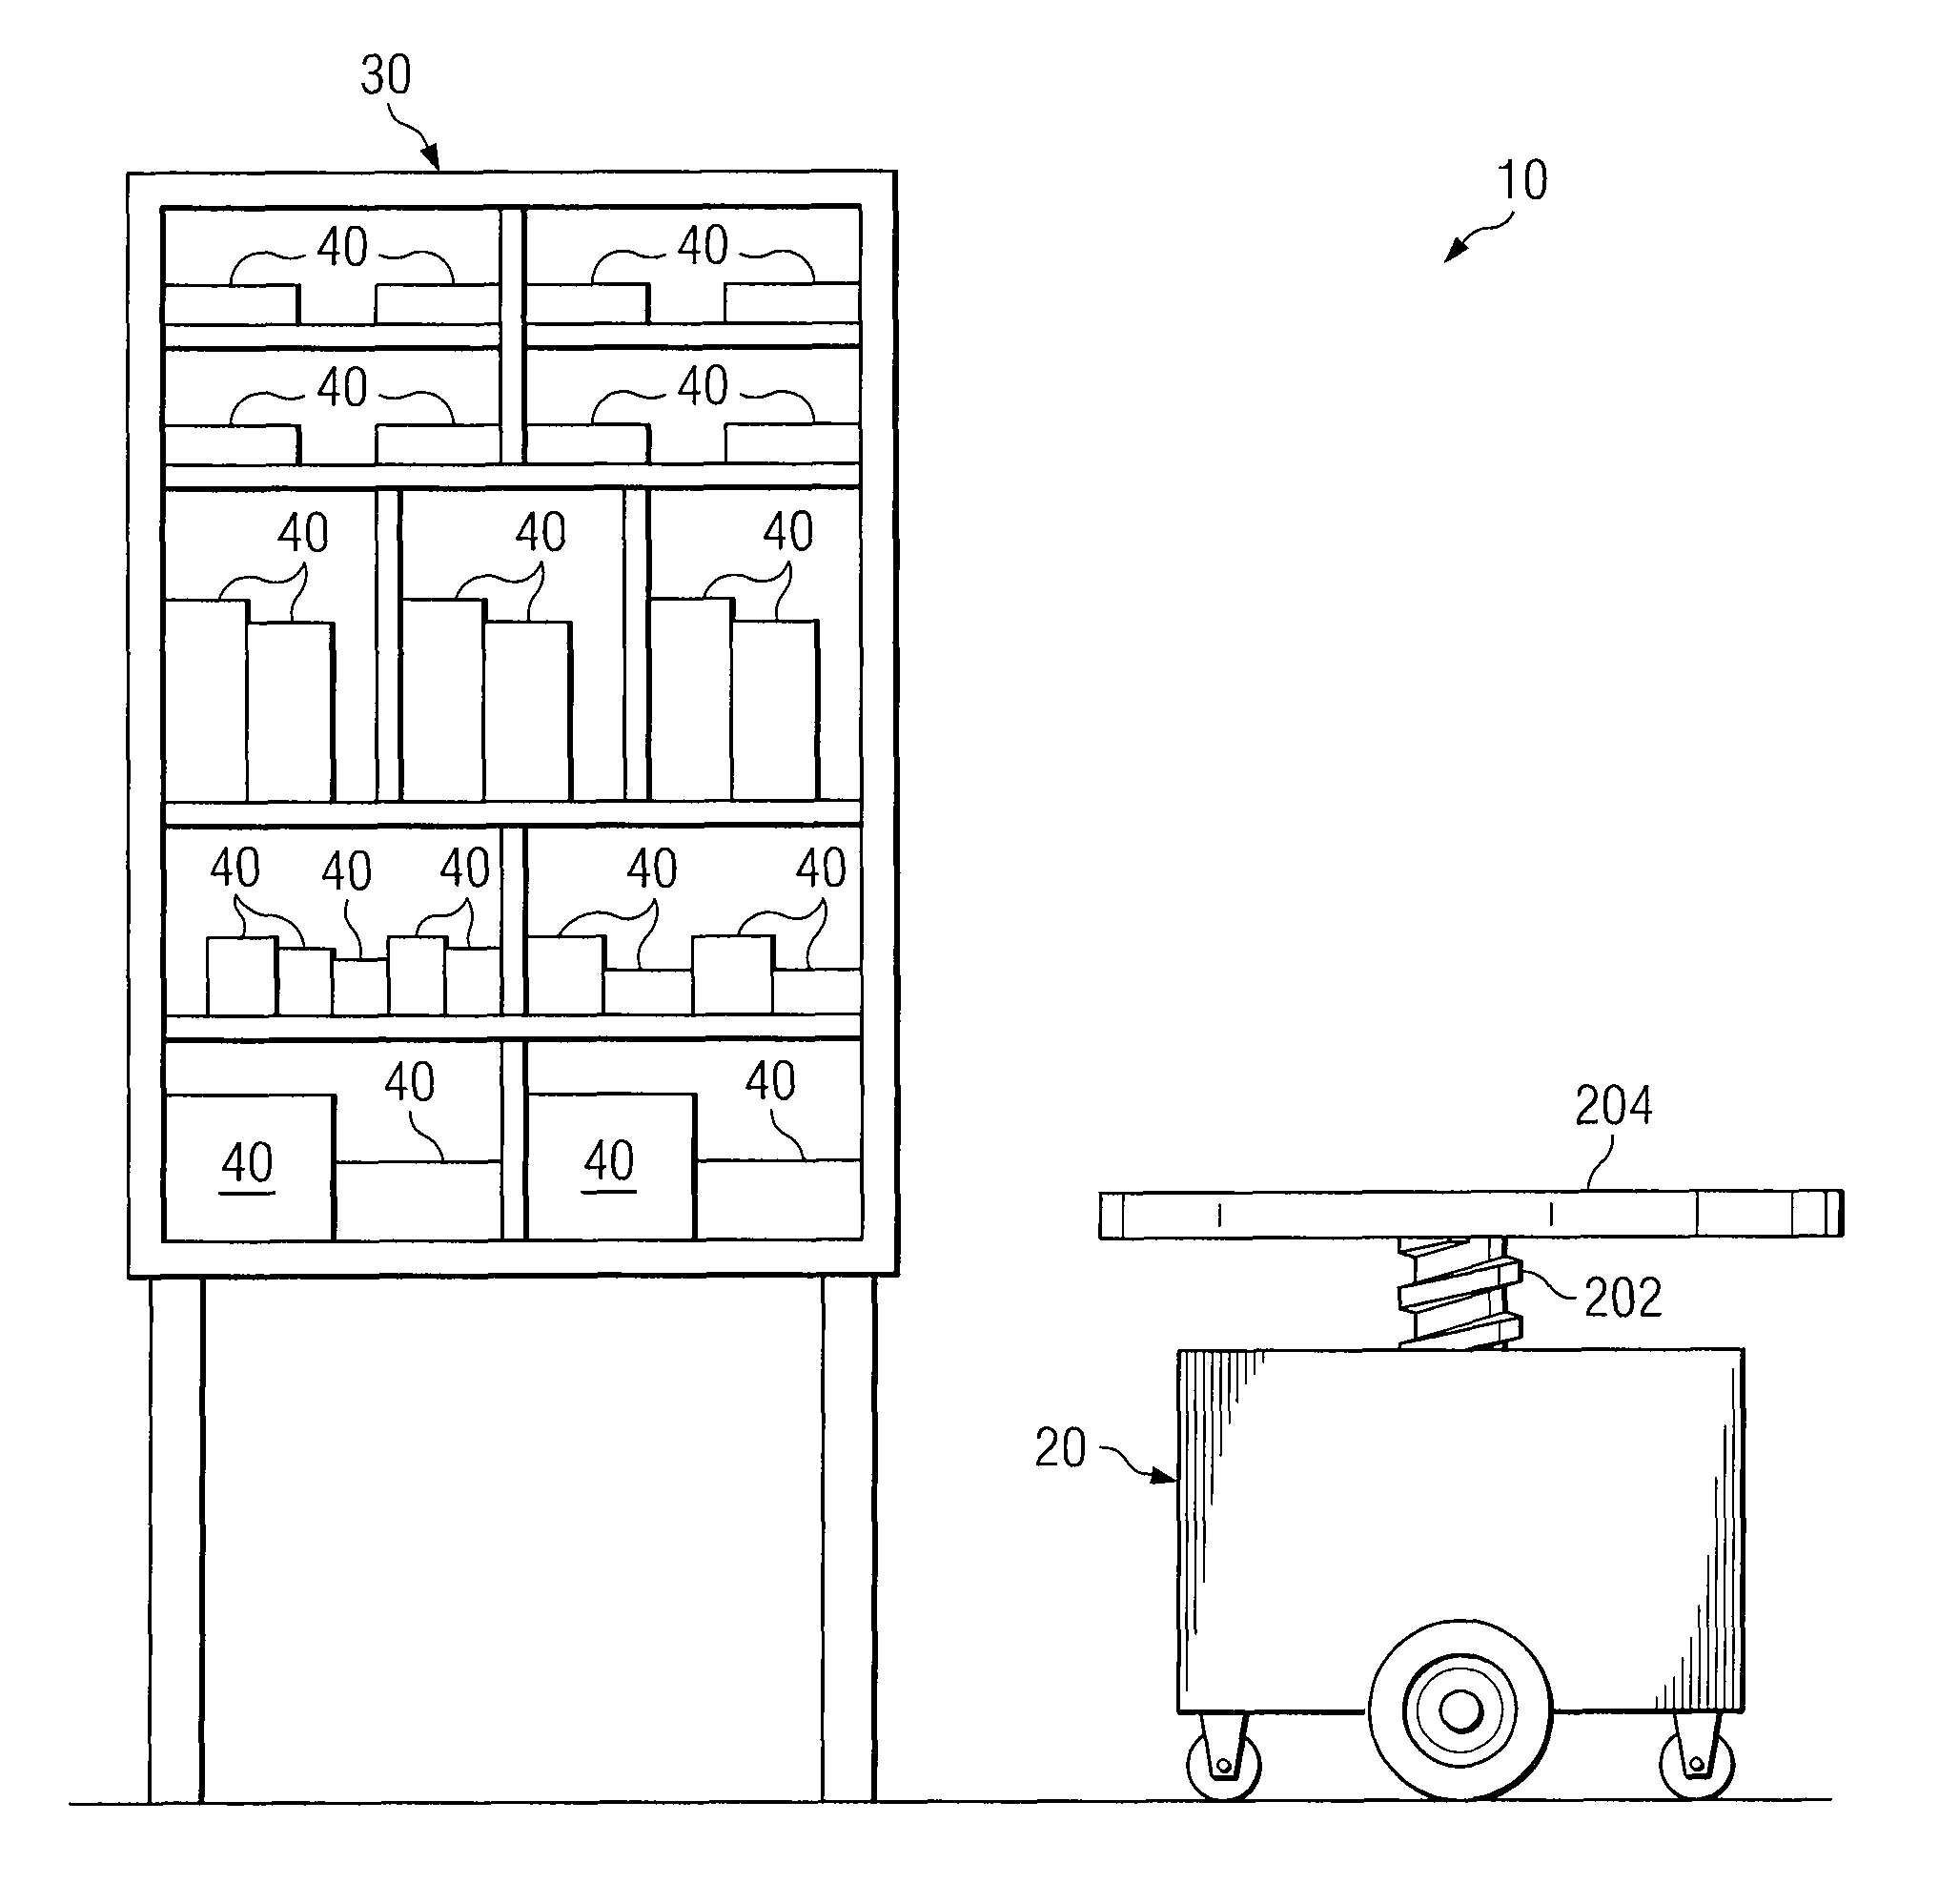 System and method for transporting inventory items